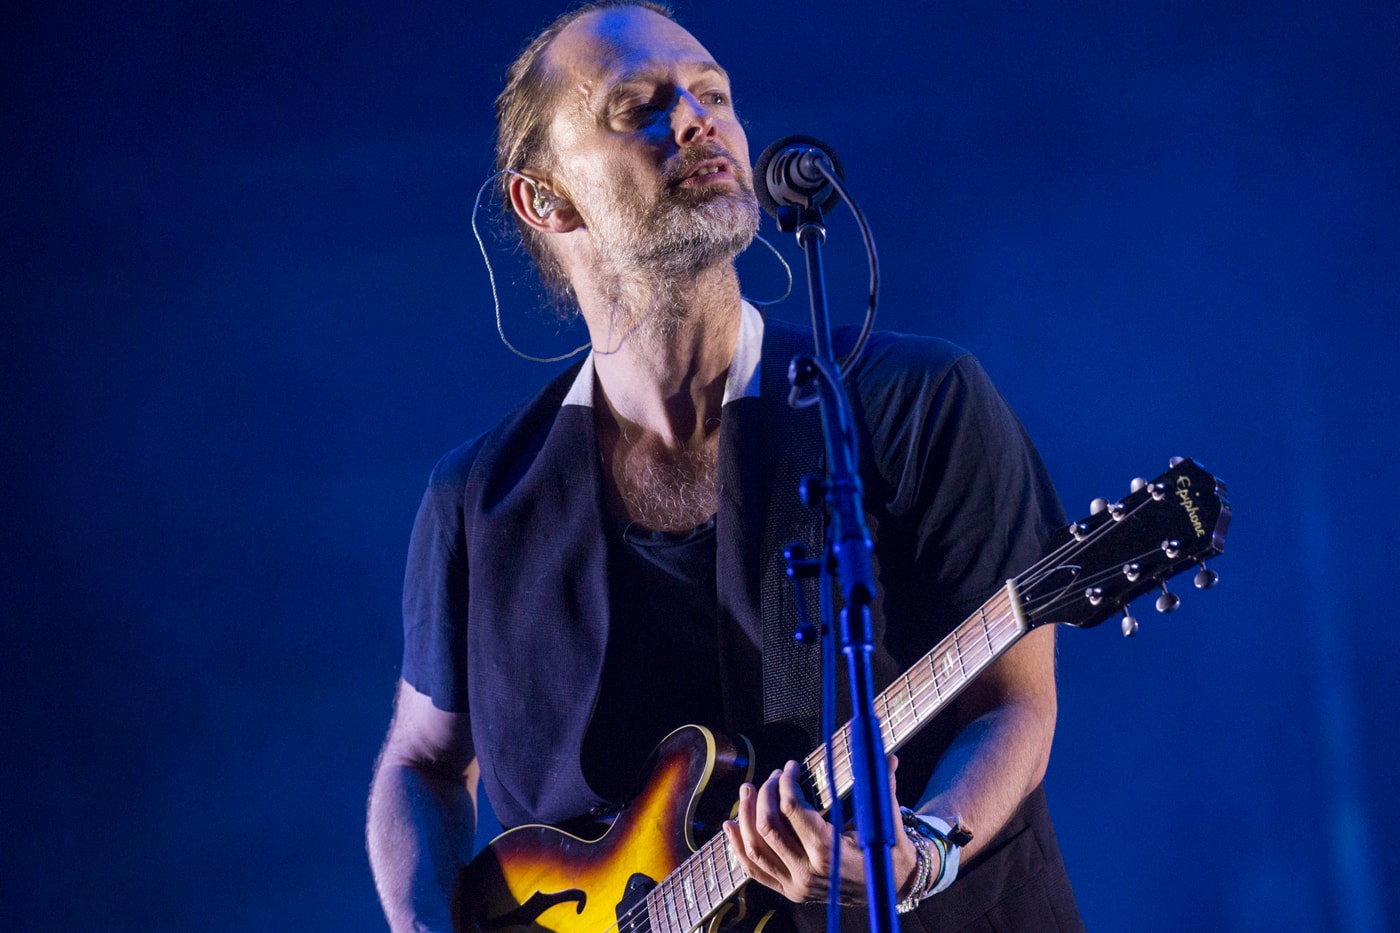 radiohead-red-hot-chili-peppers-lcd-soundsystem-lollapalooza-2016